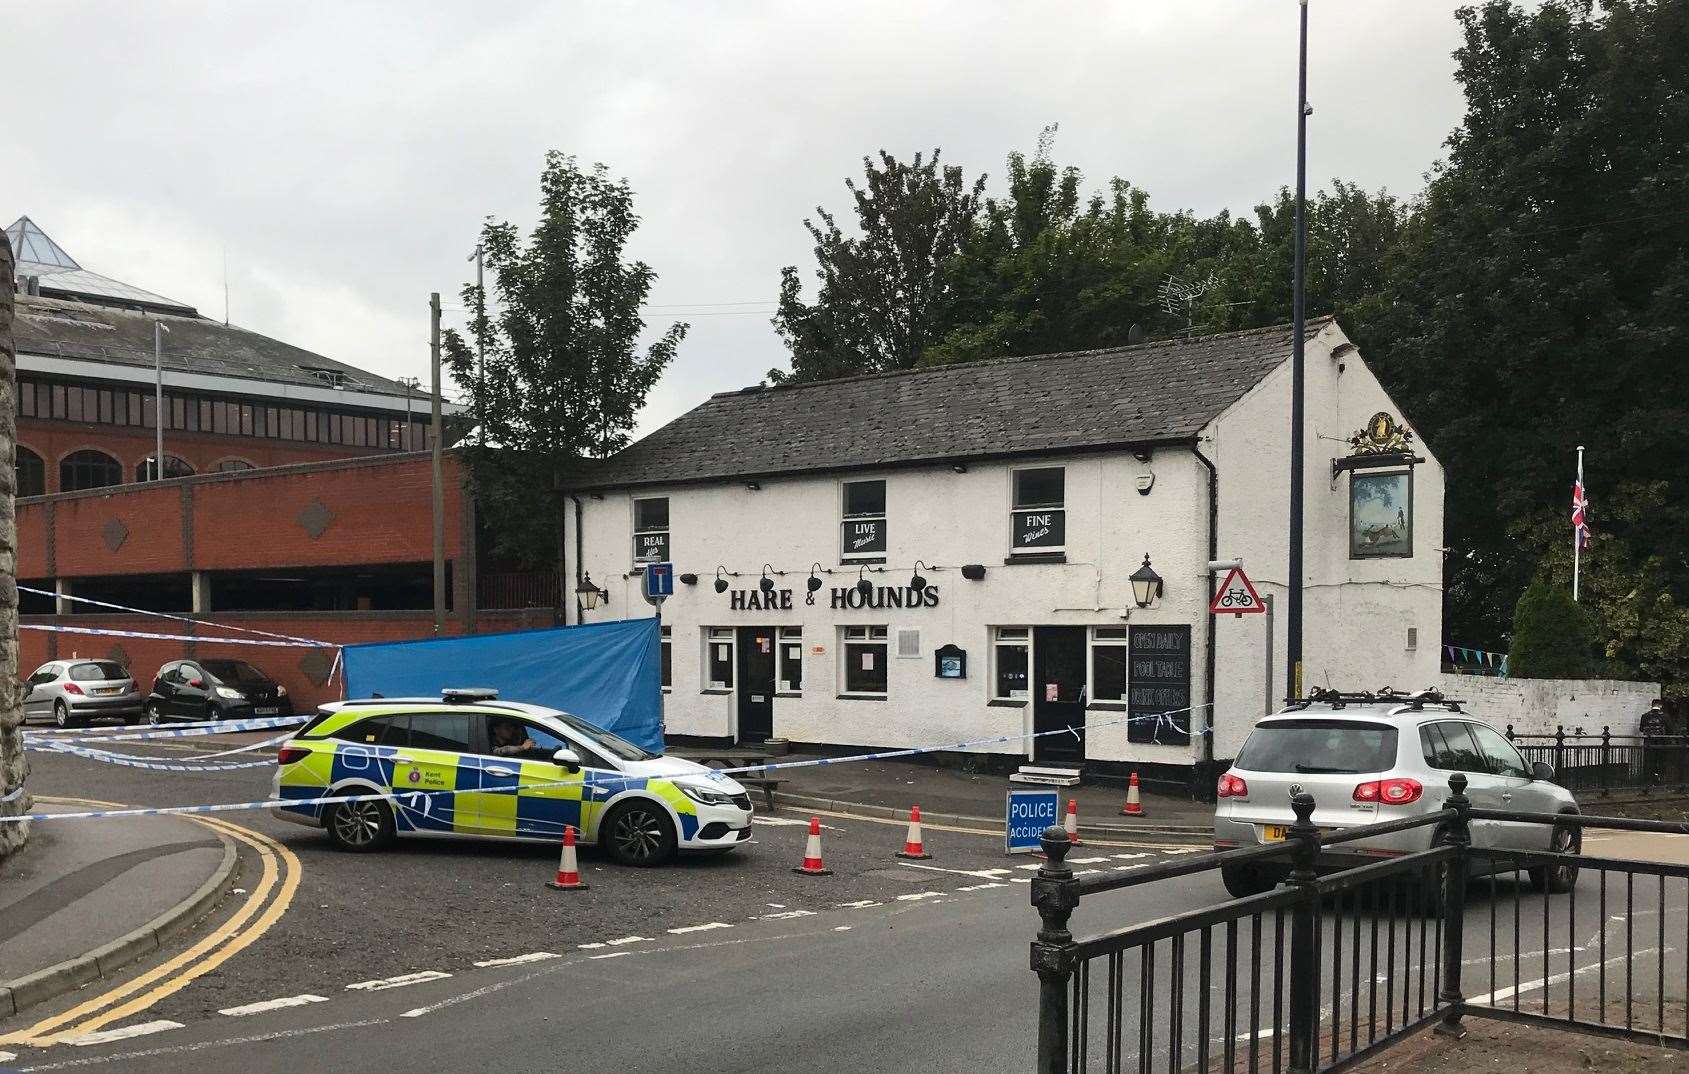 The Hare and Hounds pub cordoned off the morning after a man died in a suspected murder